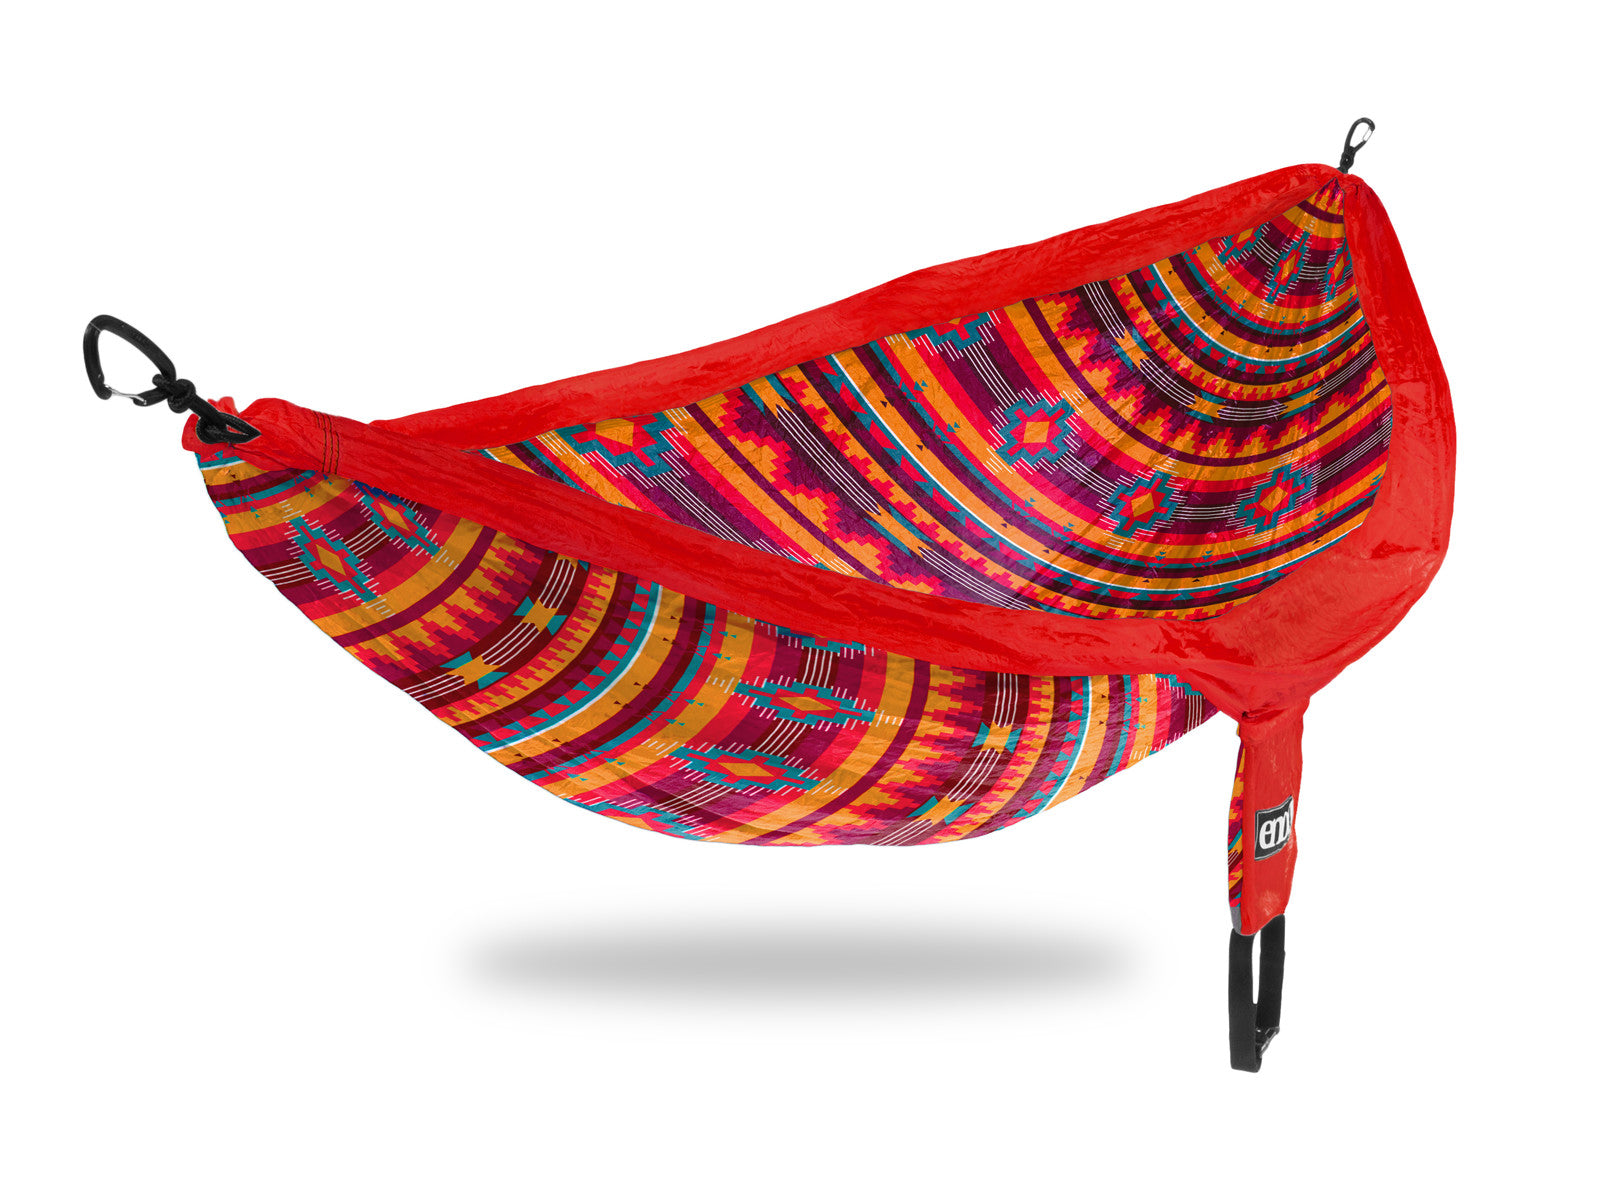 Eagles Nest Outfitters Doublenest Print Hammock - Gear For Adventure